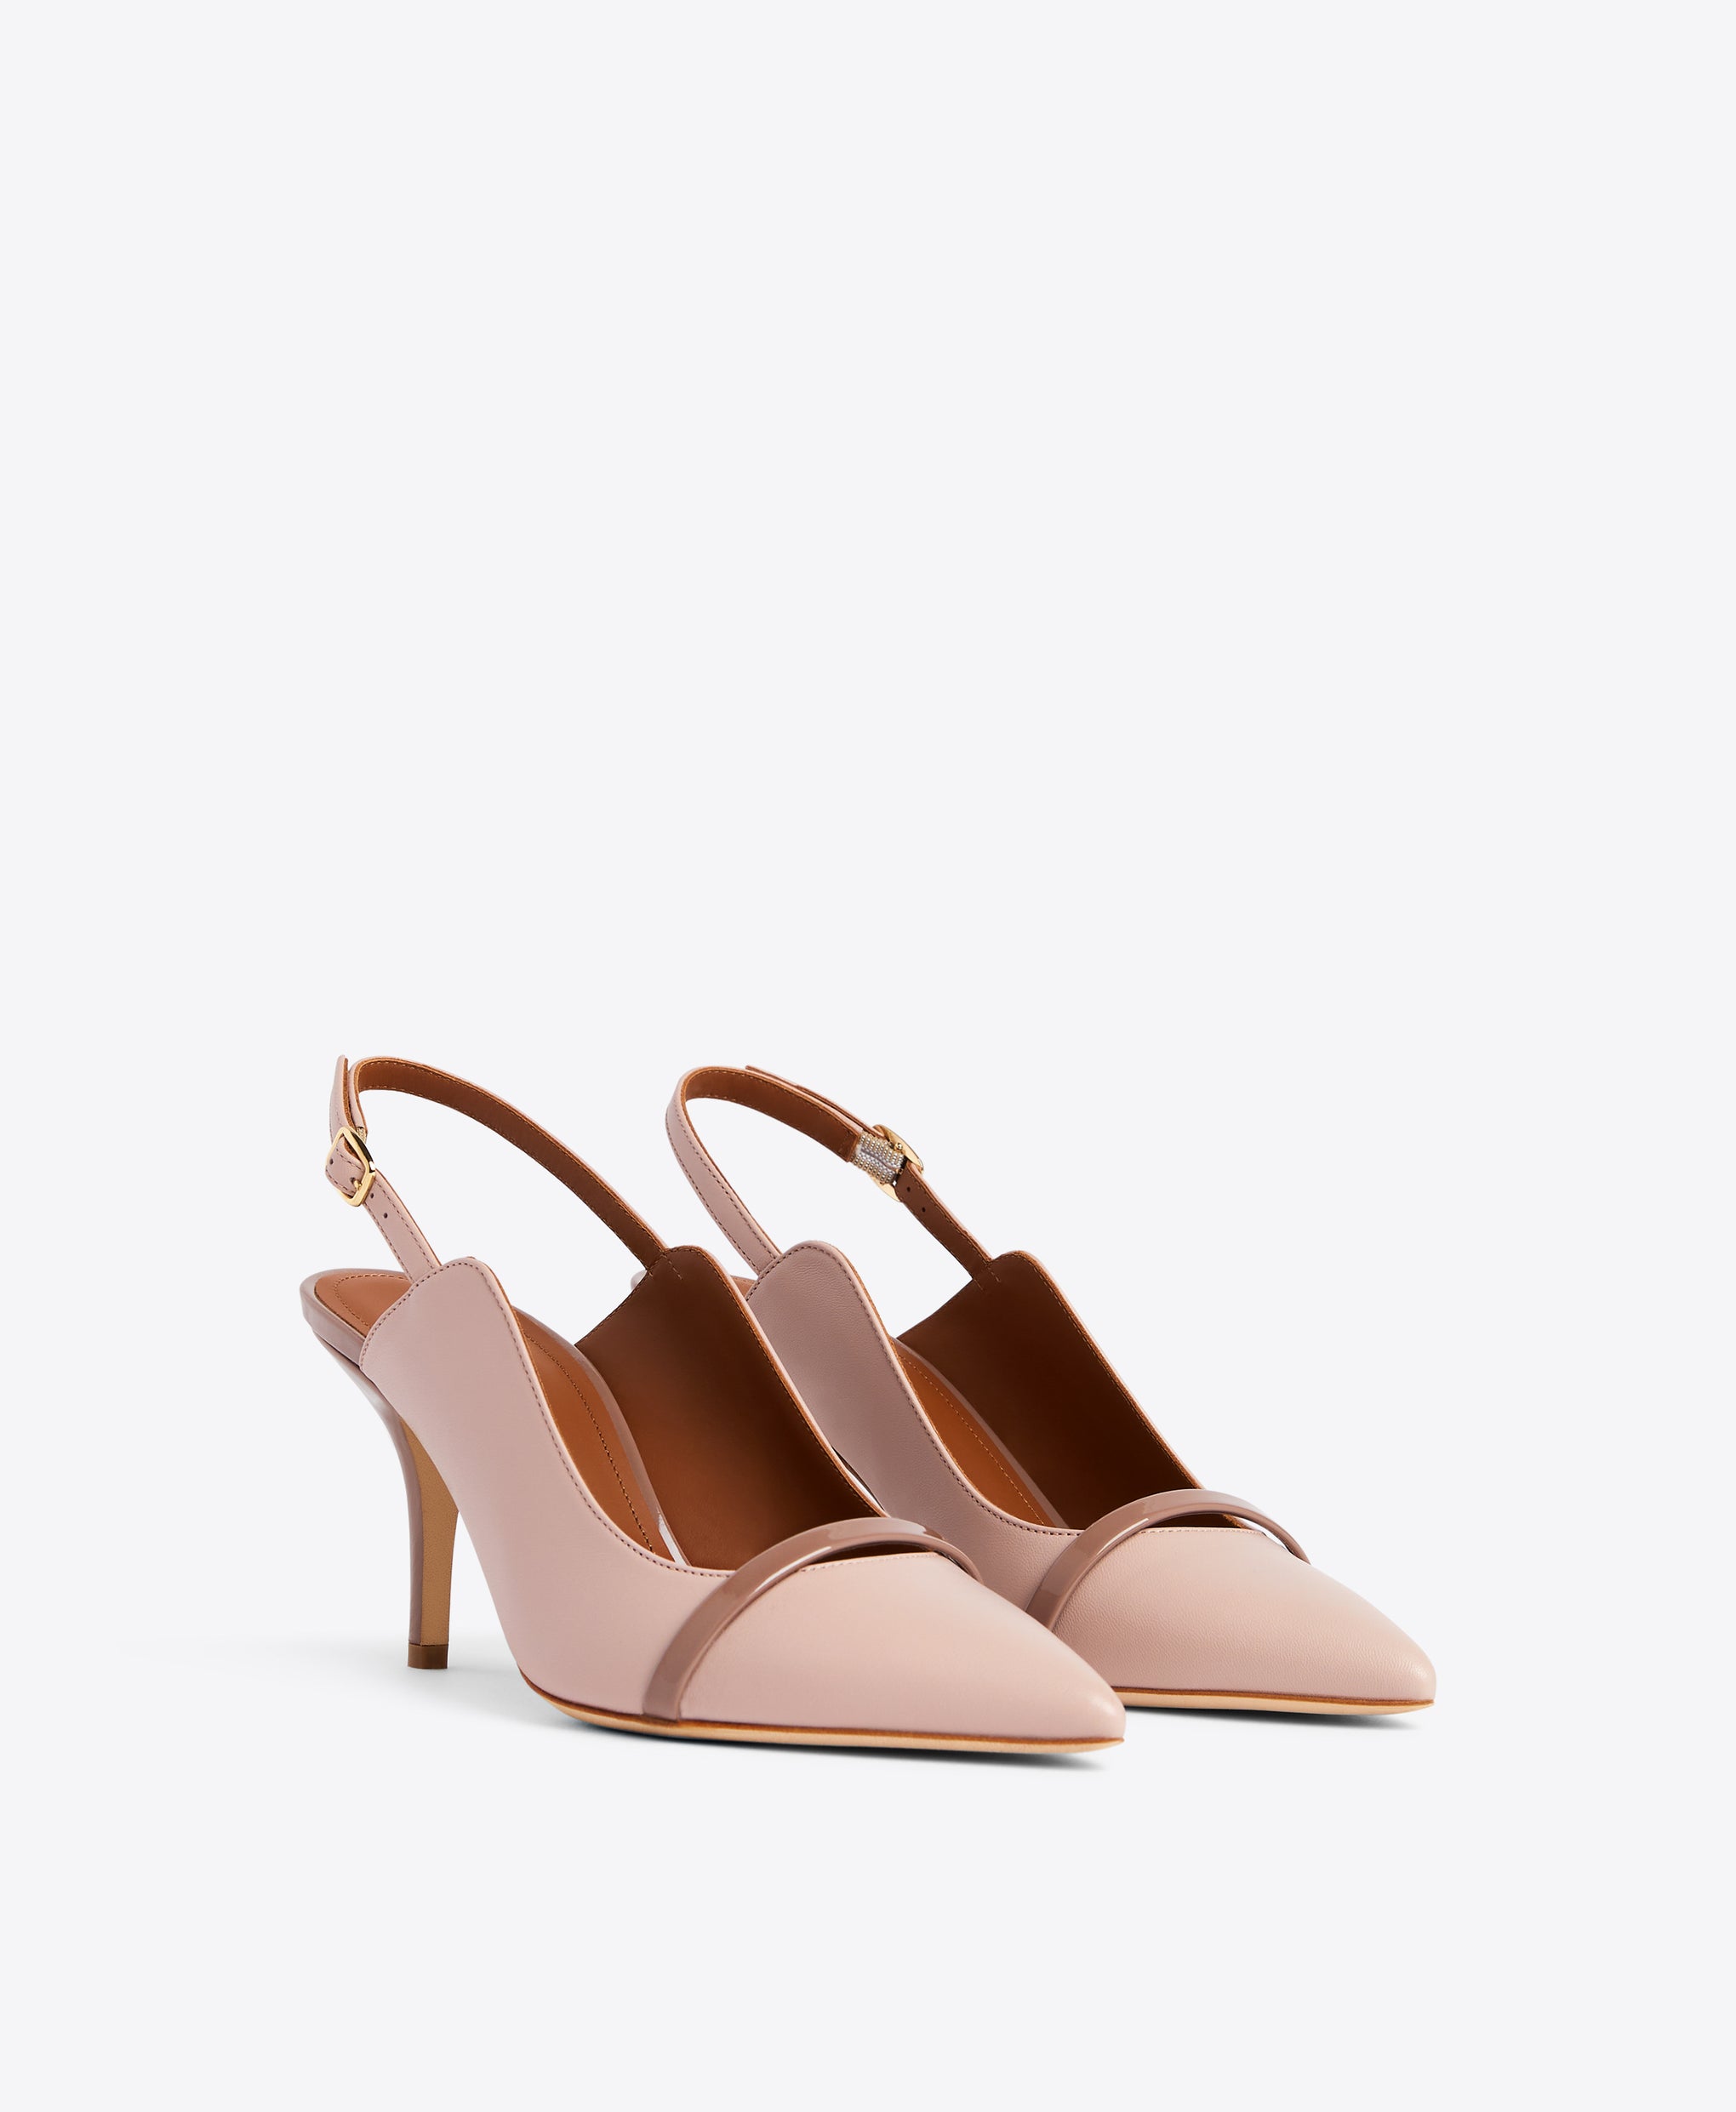 Women's Dusty Pink Leather and Brown Patent Slingback Pumps with Pointed Toe by Malone Souliers